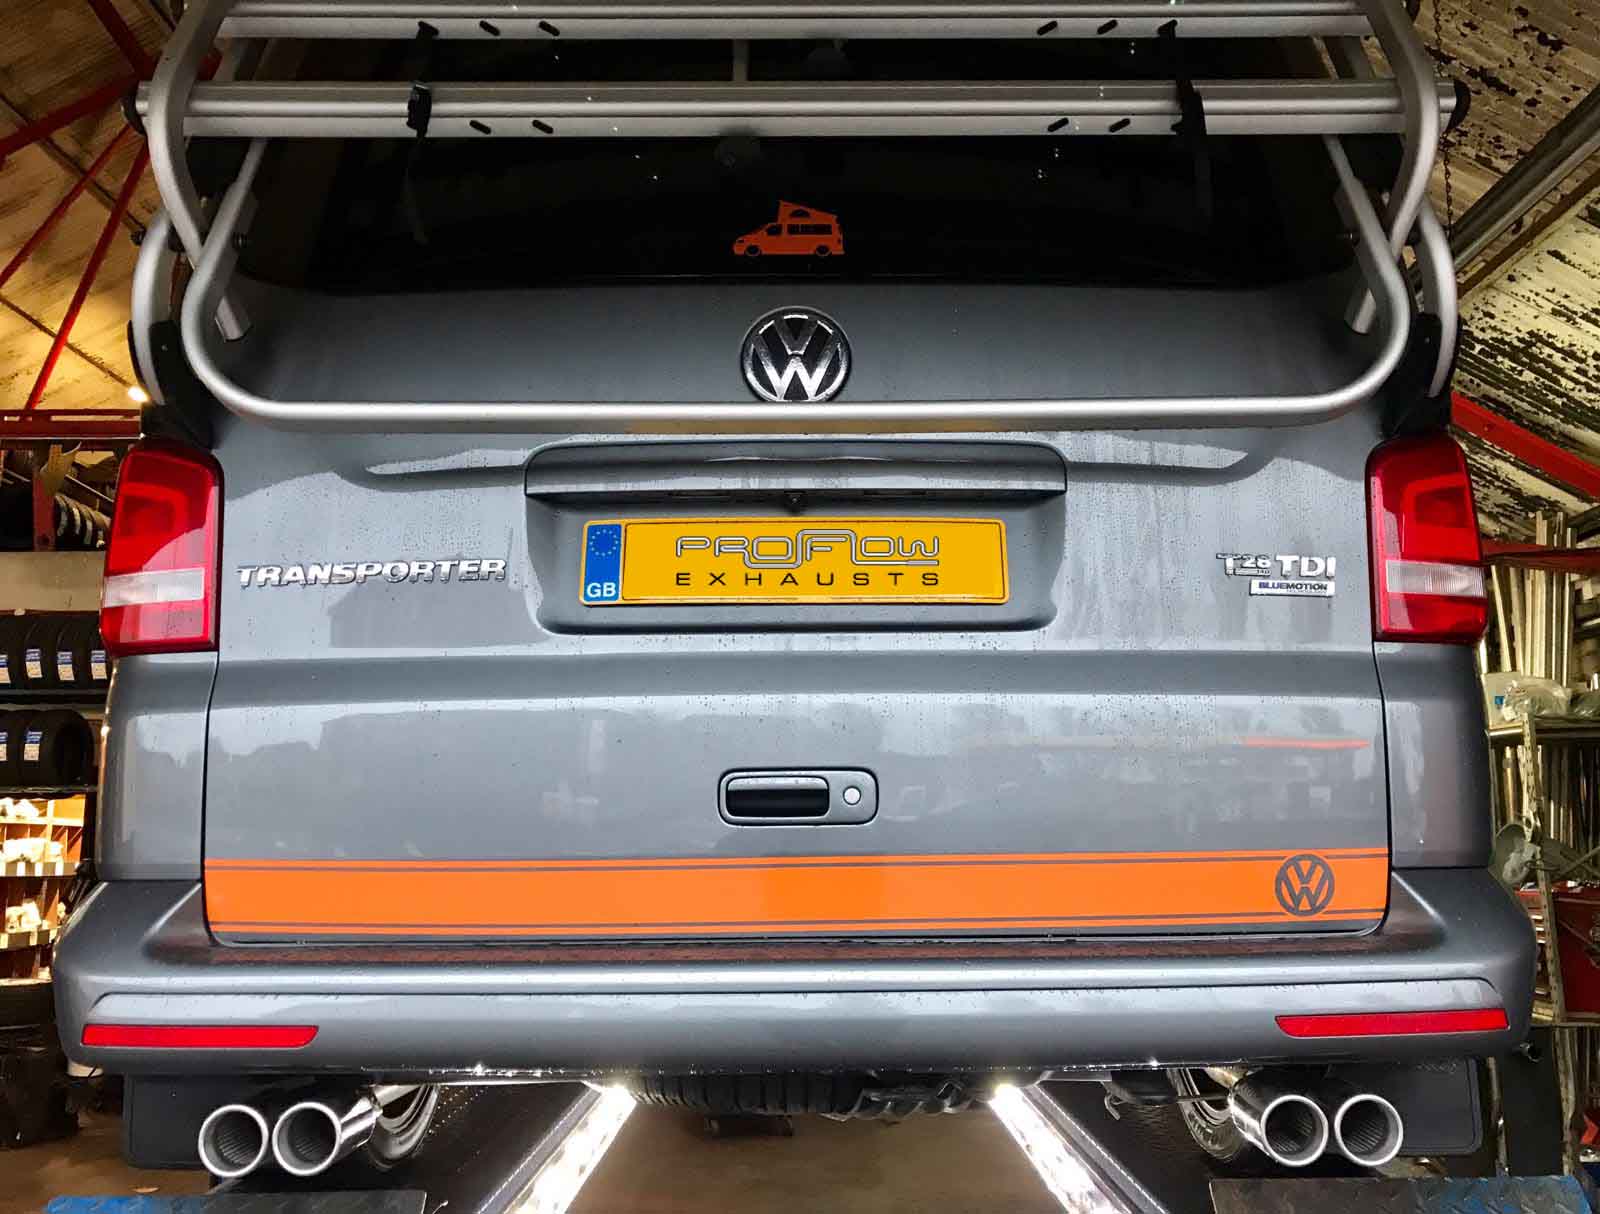 Proflow Stainless Steel Exhaust Middle And Rear Fitted To VW Transporter T5 Van (2)